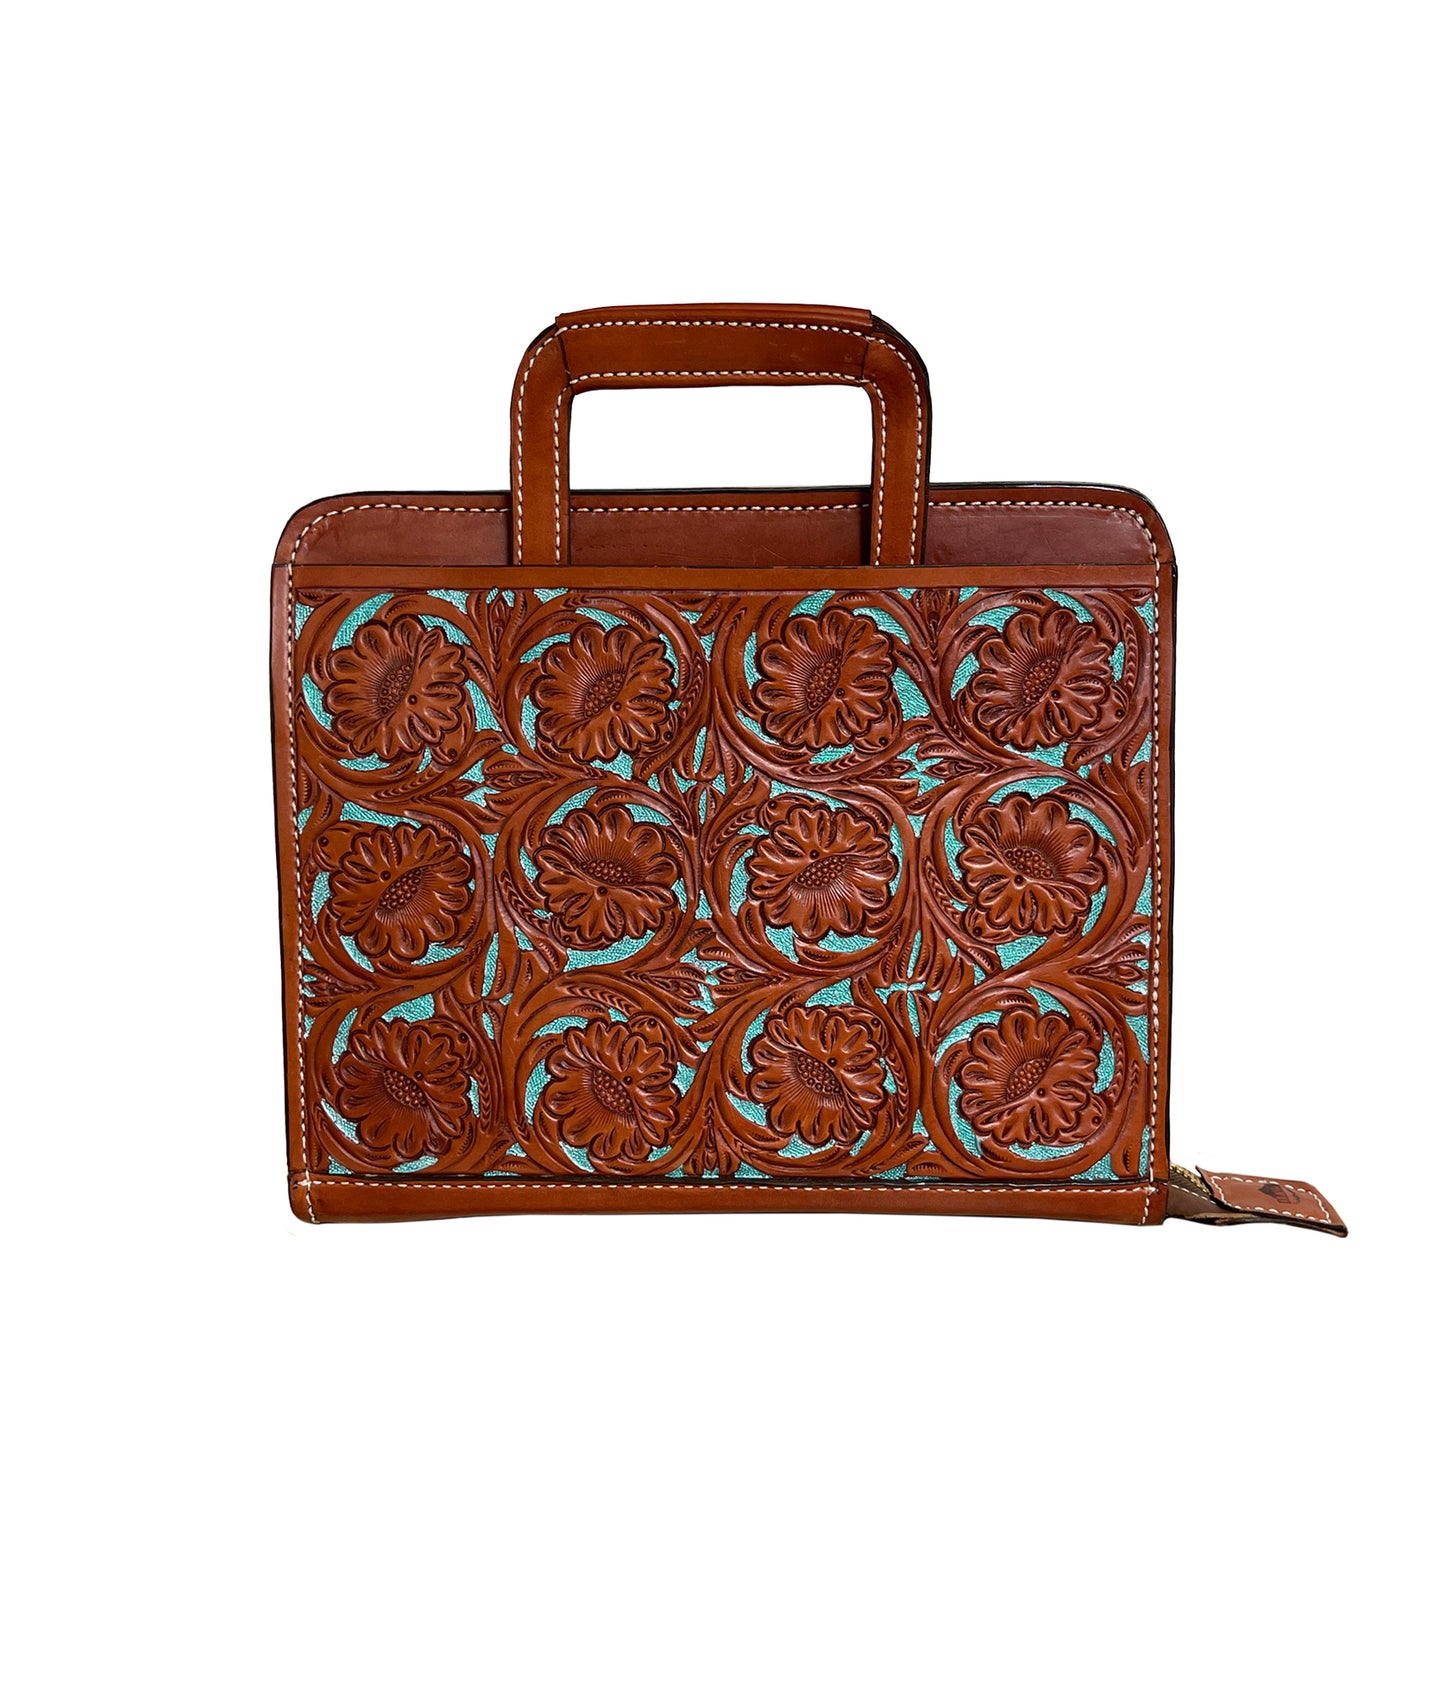 Cowboy Briefcase toast leather floral tooling with background paint